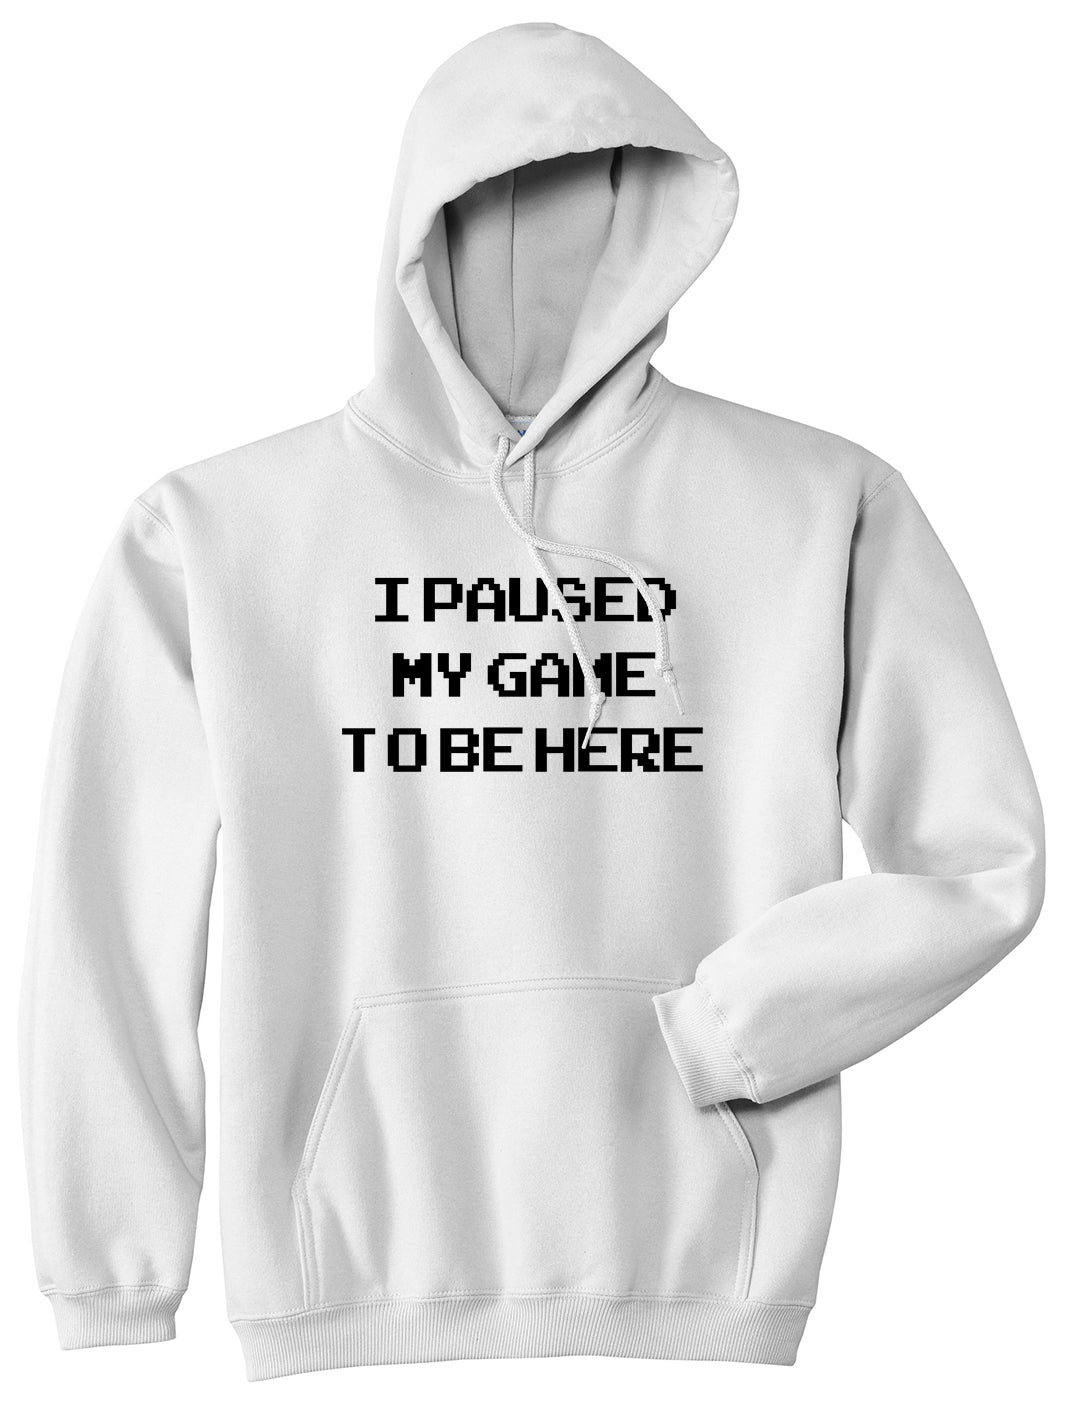 I Paused My Game To Be Here Gamer Mens Pullover Hoodie White